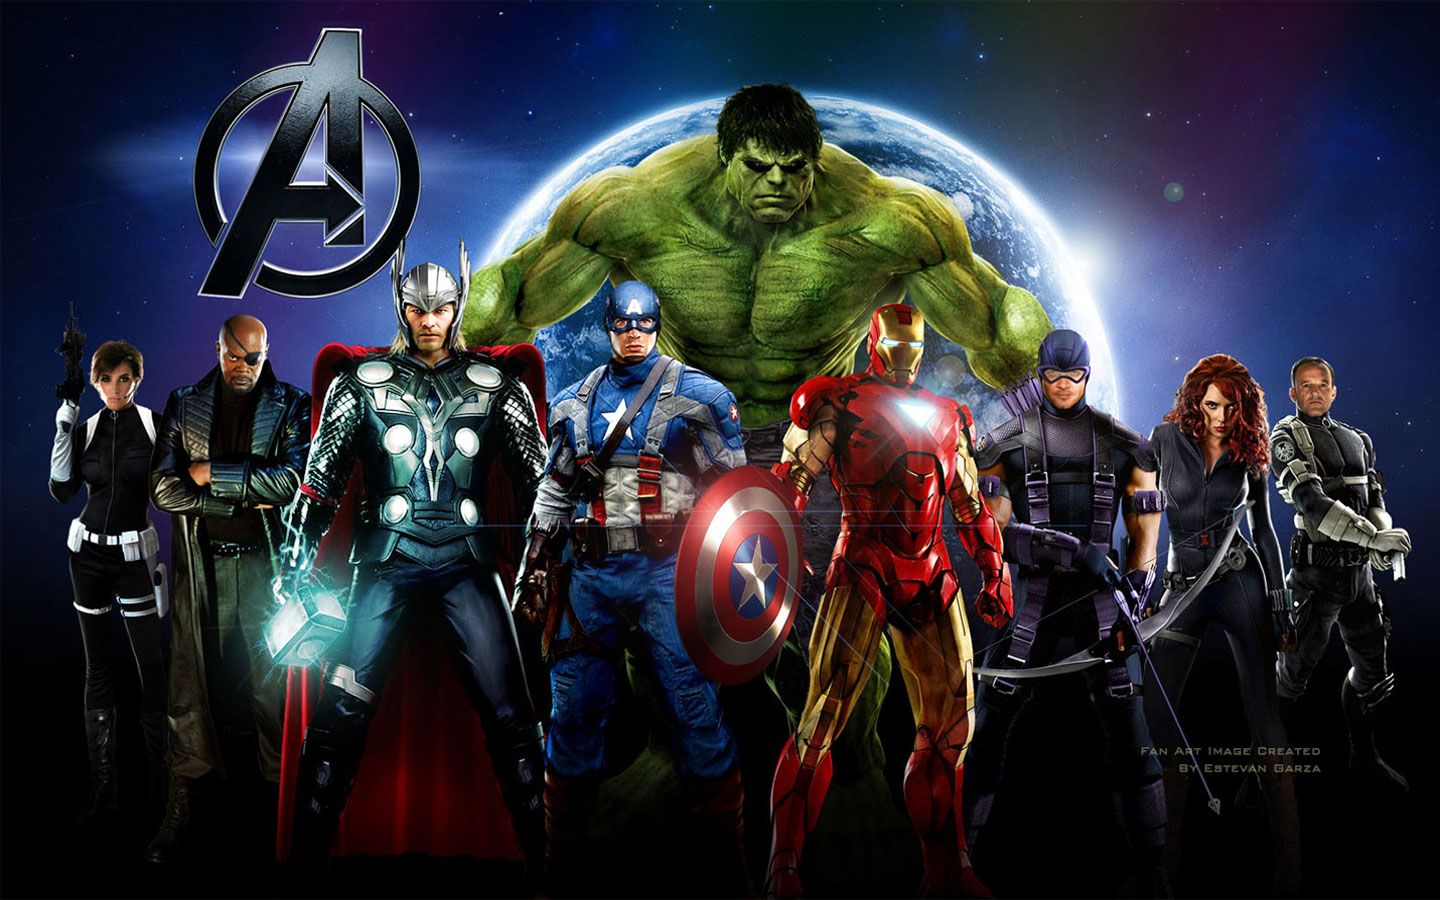 The Avengers round 33 Edition Alliance and Team Forum